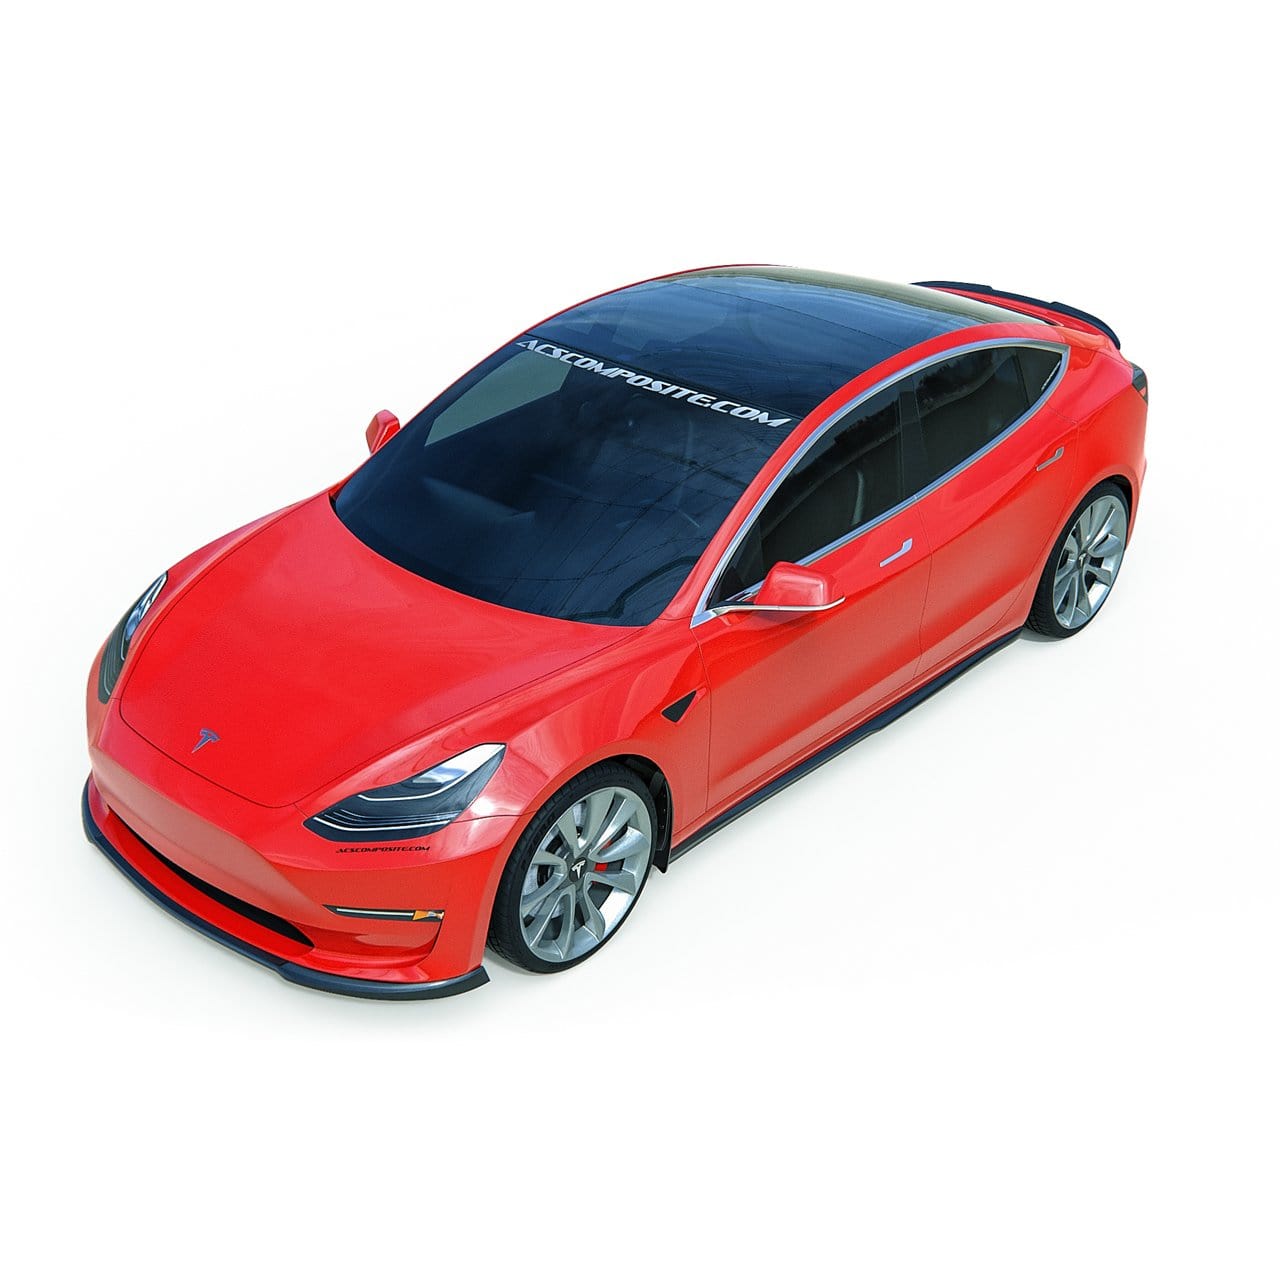 ACS Composite Tesla Model 3 Splitter in Gloss Black (SKU: [51-4-003]GBA) mounted on a Model 3 front end for improved aerodynamics and sporty personality.